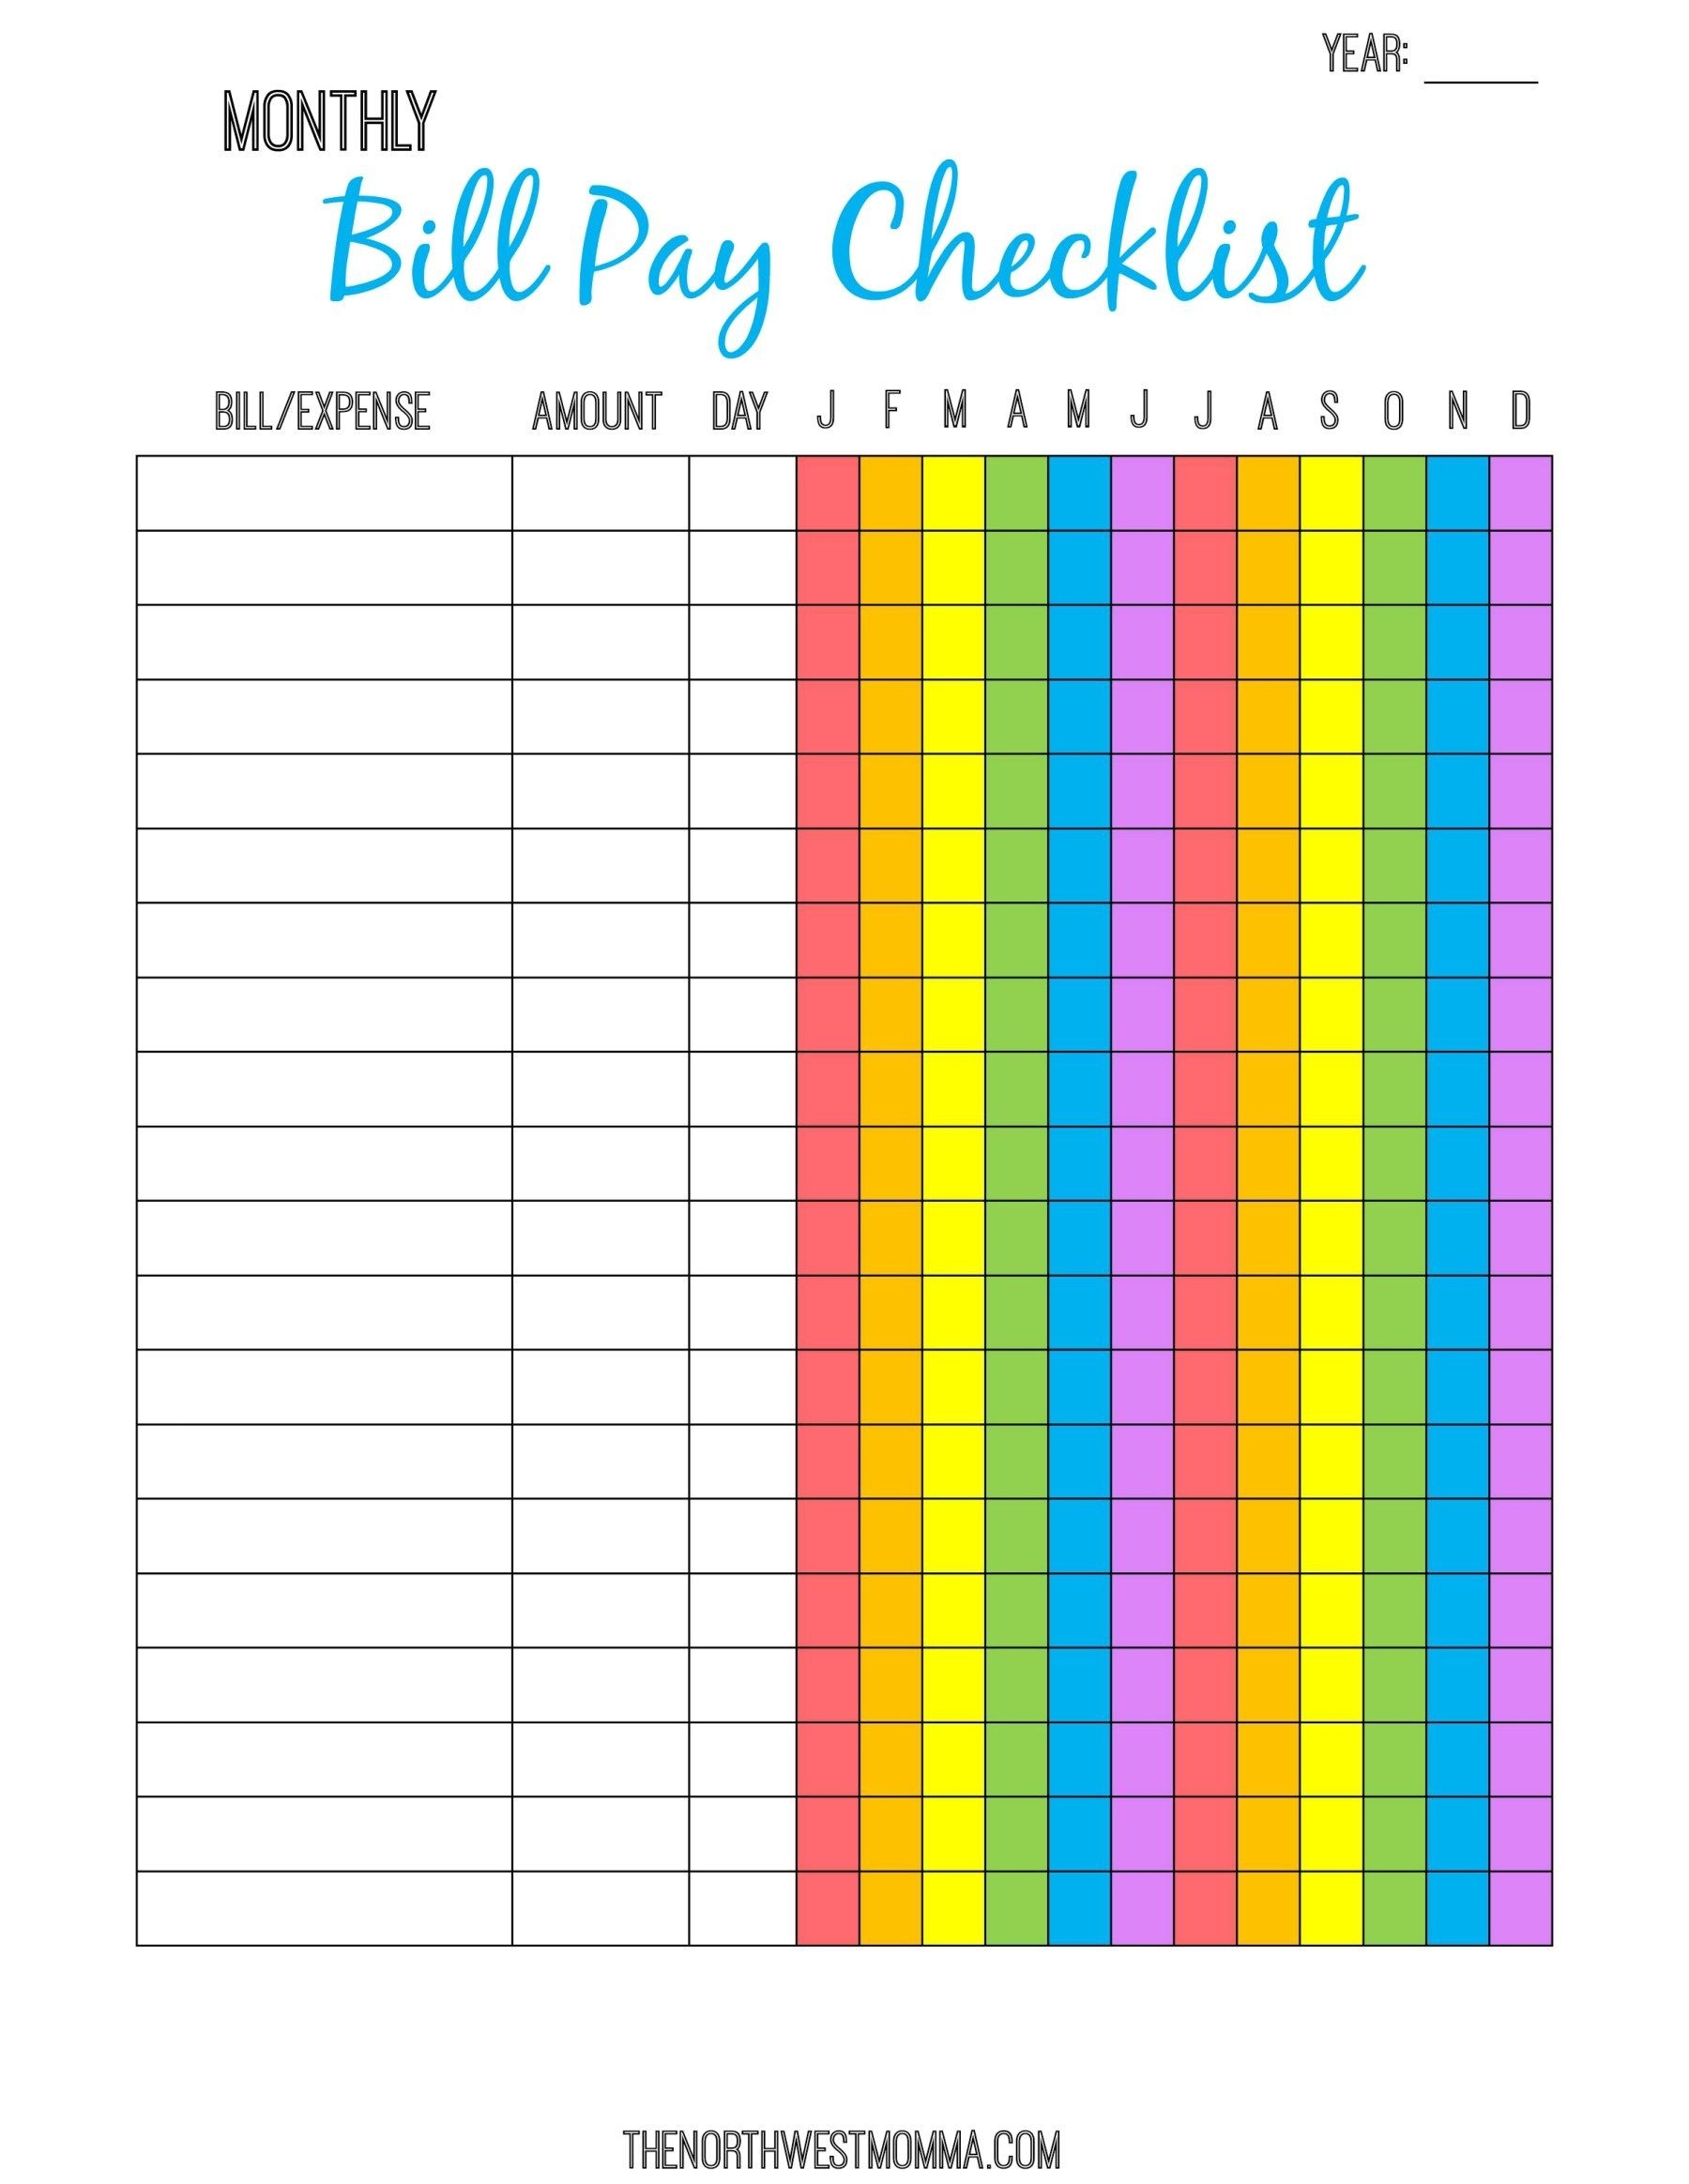 Monthly Bill Pay Checklist- Free Printable! | $ Saving Money-Monthly Bill Chart Printable Free